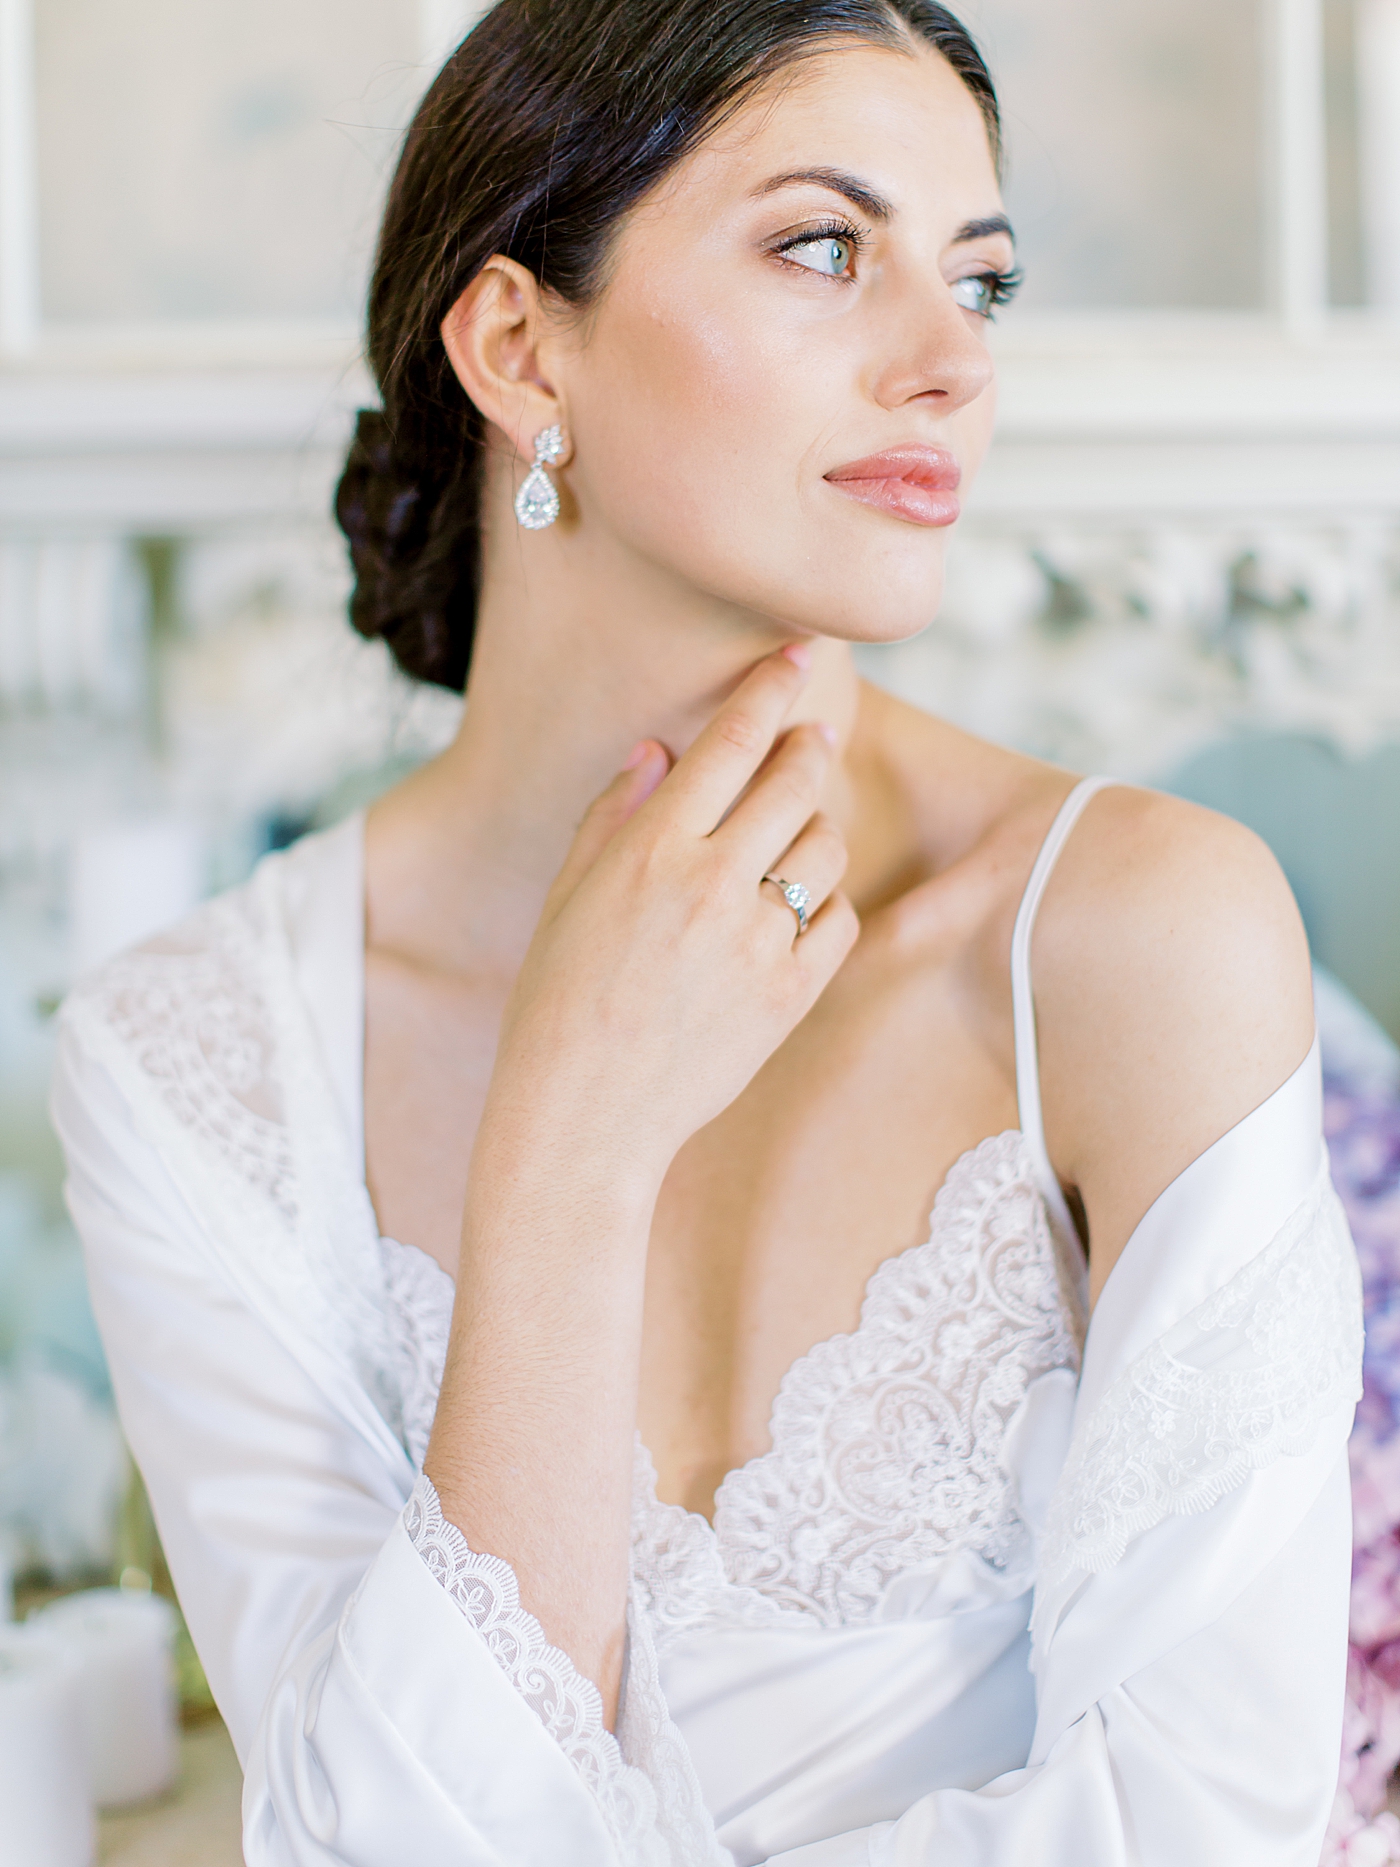 Bridal portraits in the brides getting ready room | Image by Diane Sotero 